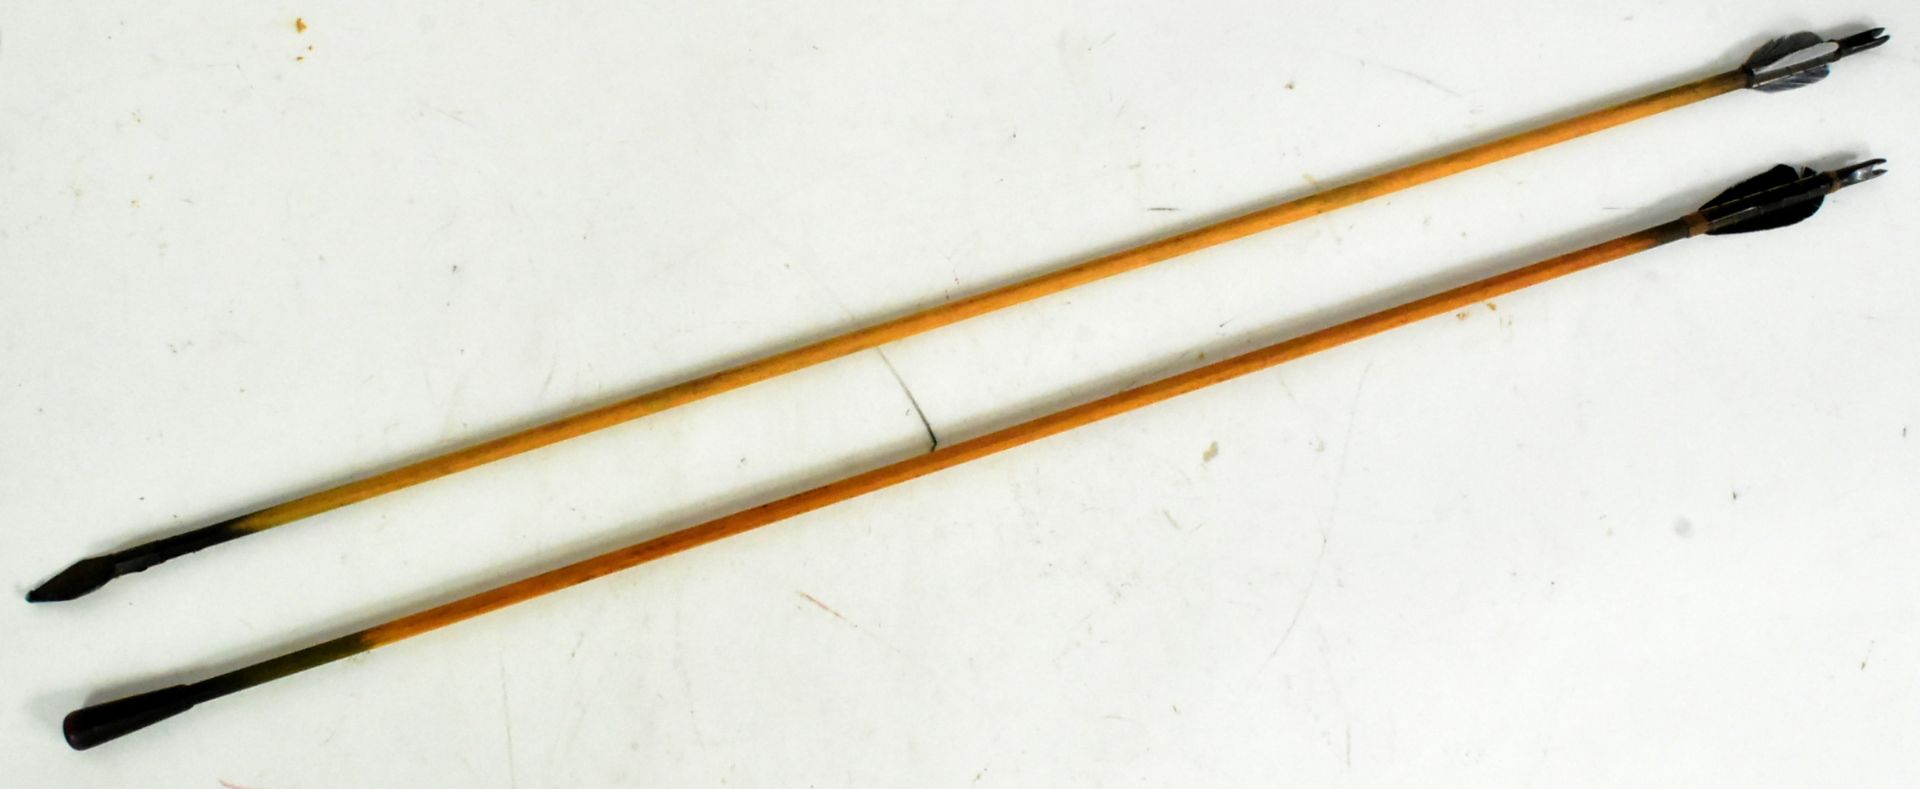 TROY (2004) - TWO PRODUCTION USED PROP ARROWS - Image 2 of 5